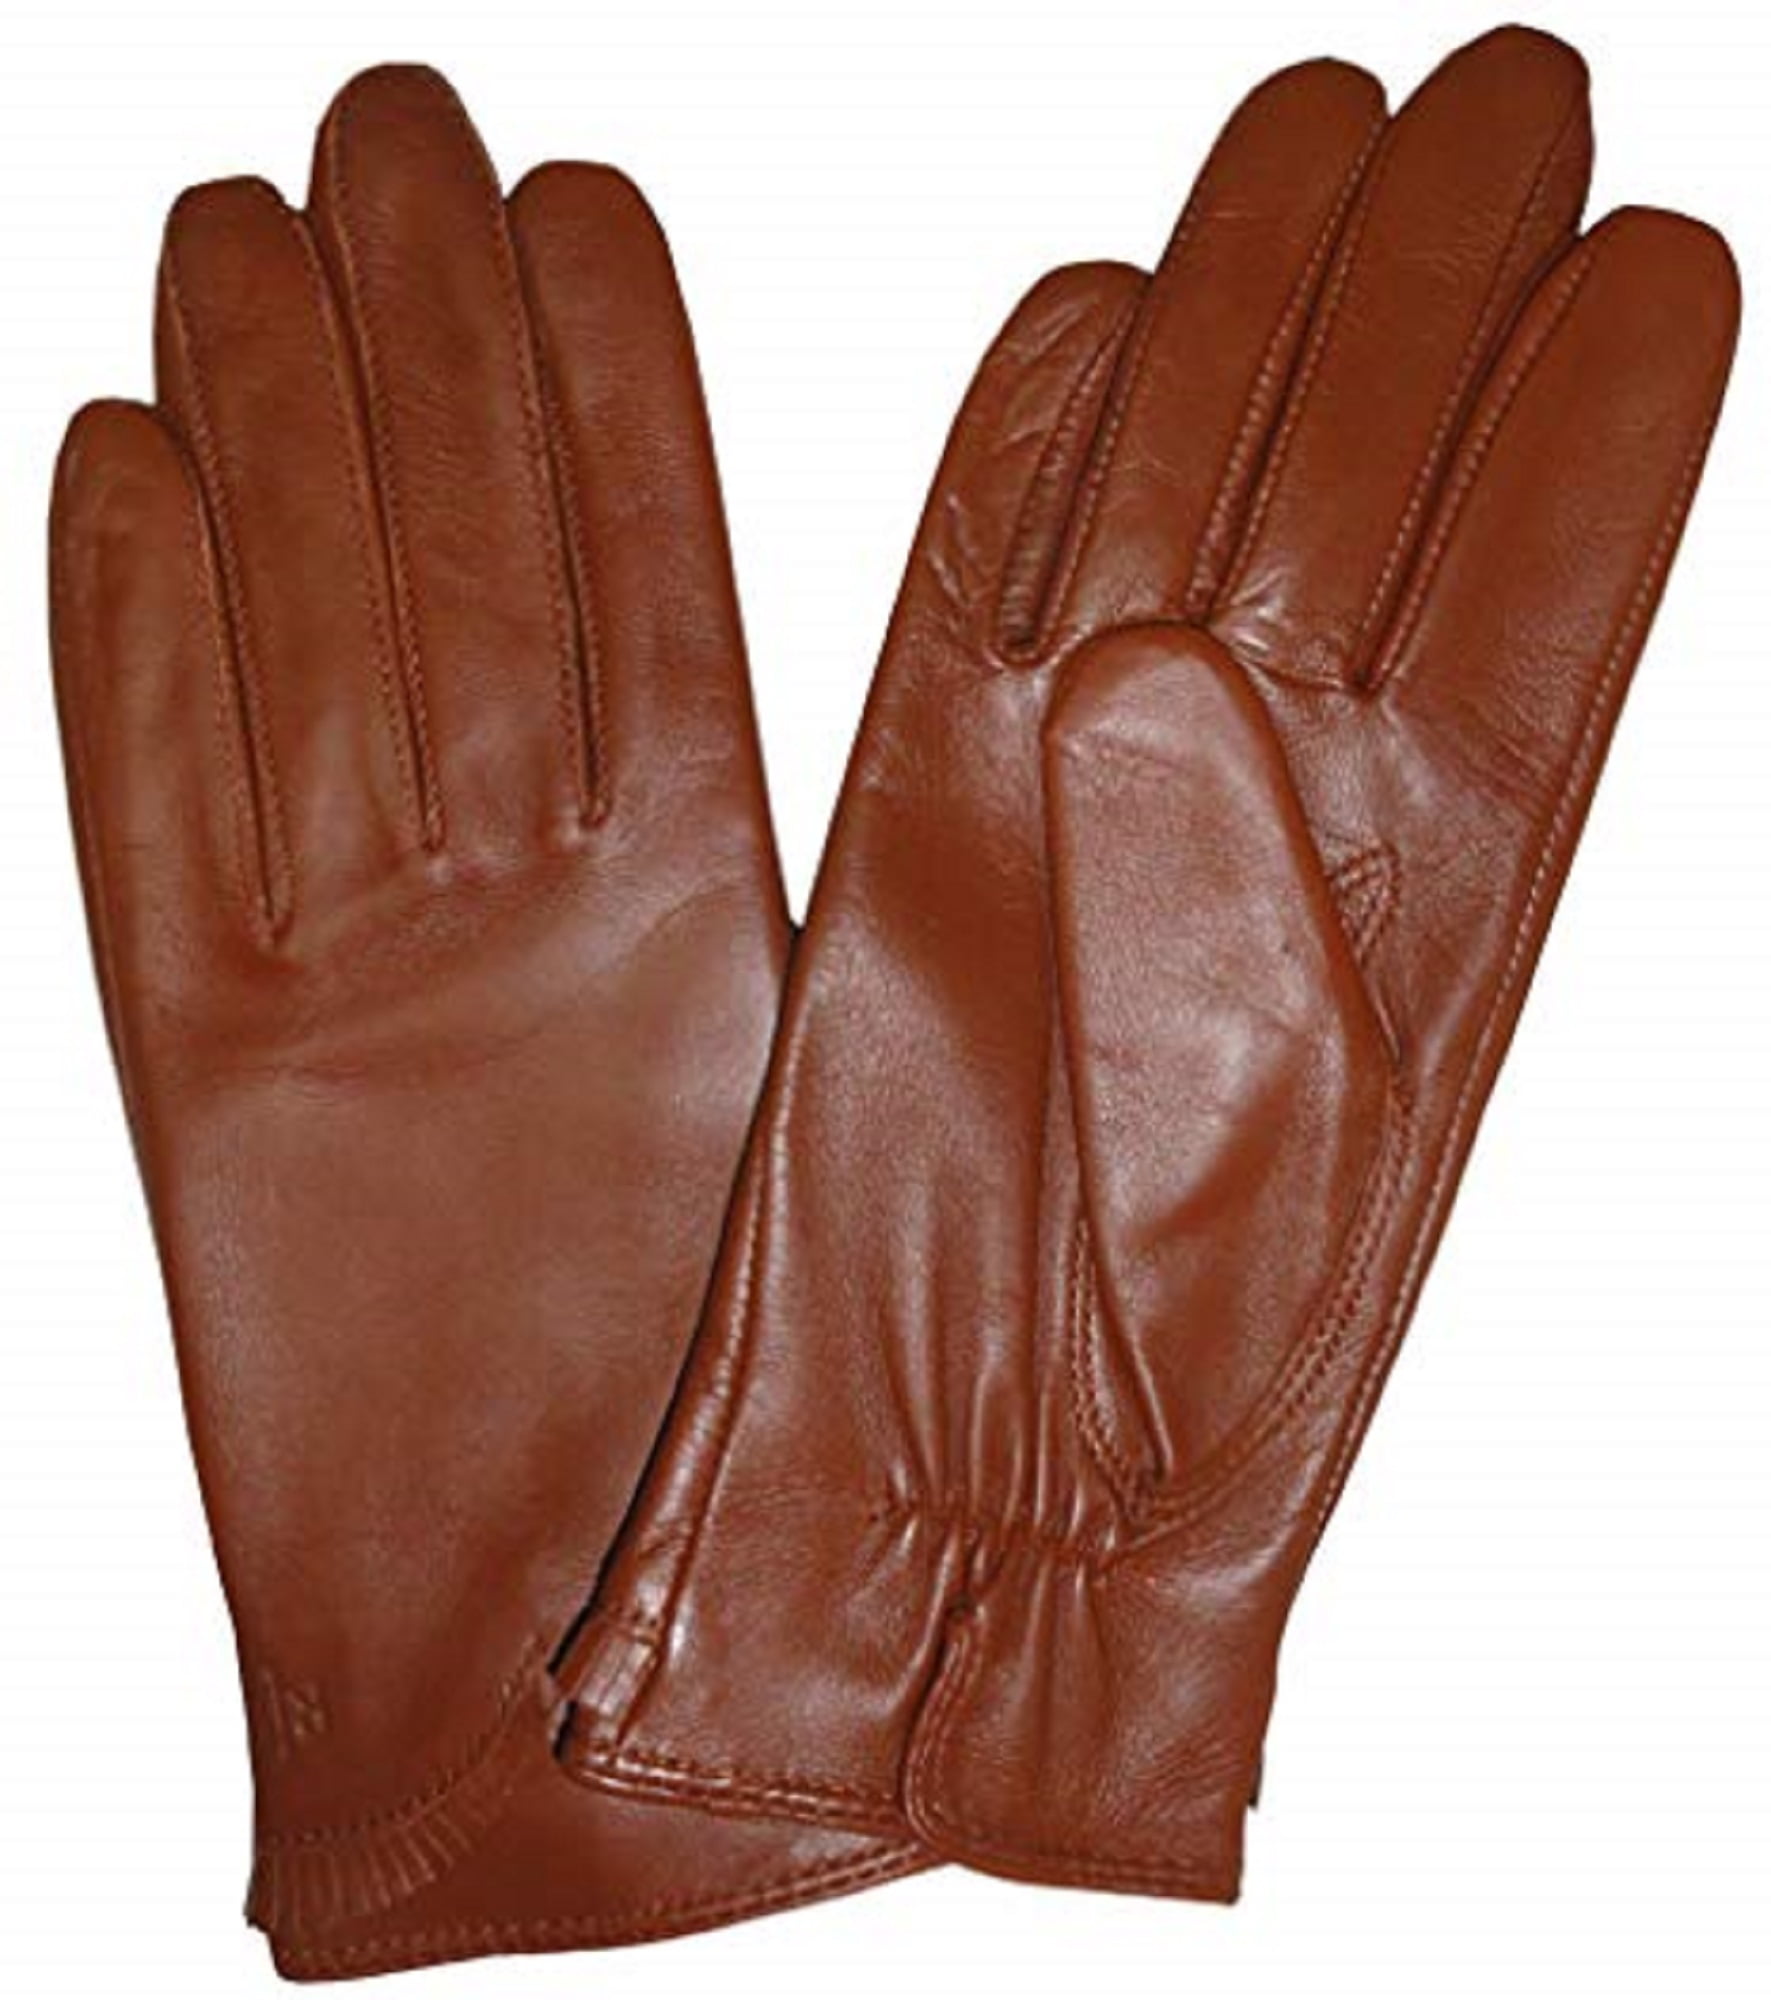 Nappaglo Mens Genuine Nappa Leather Quilted Stitch Winter Gloves Touchscreen Driving Mittens with Long Fleece Lining 